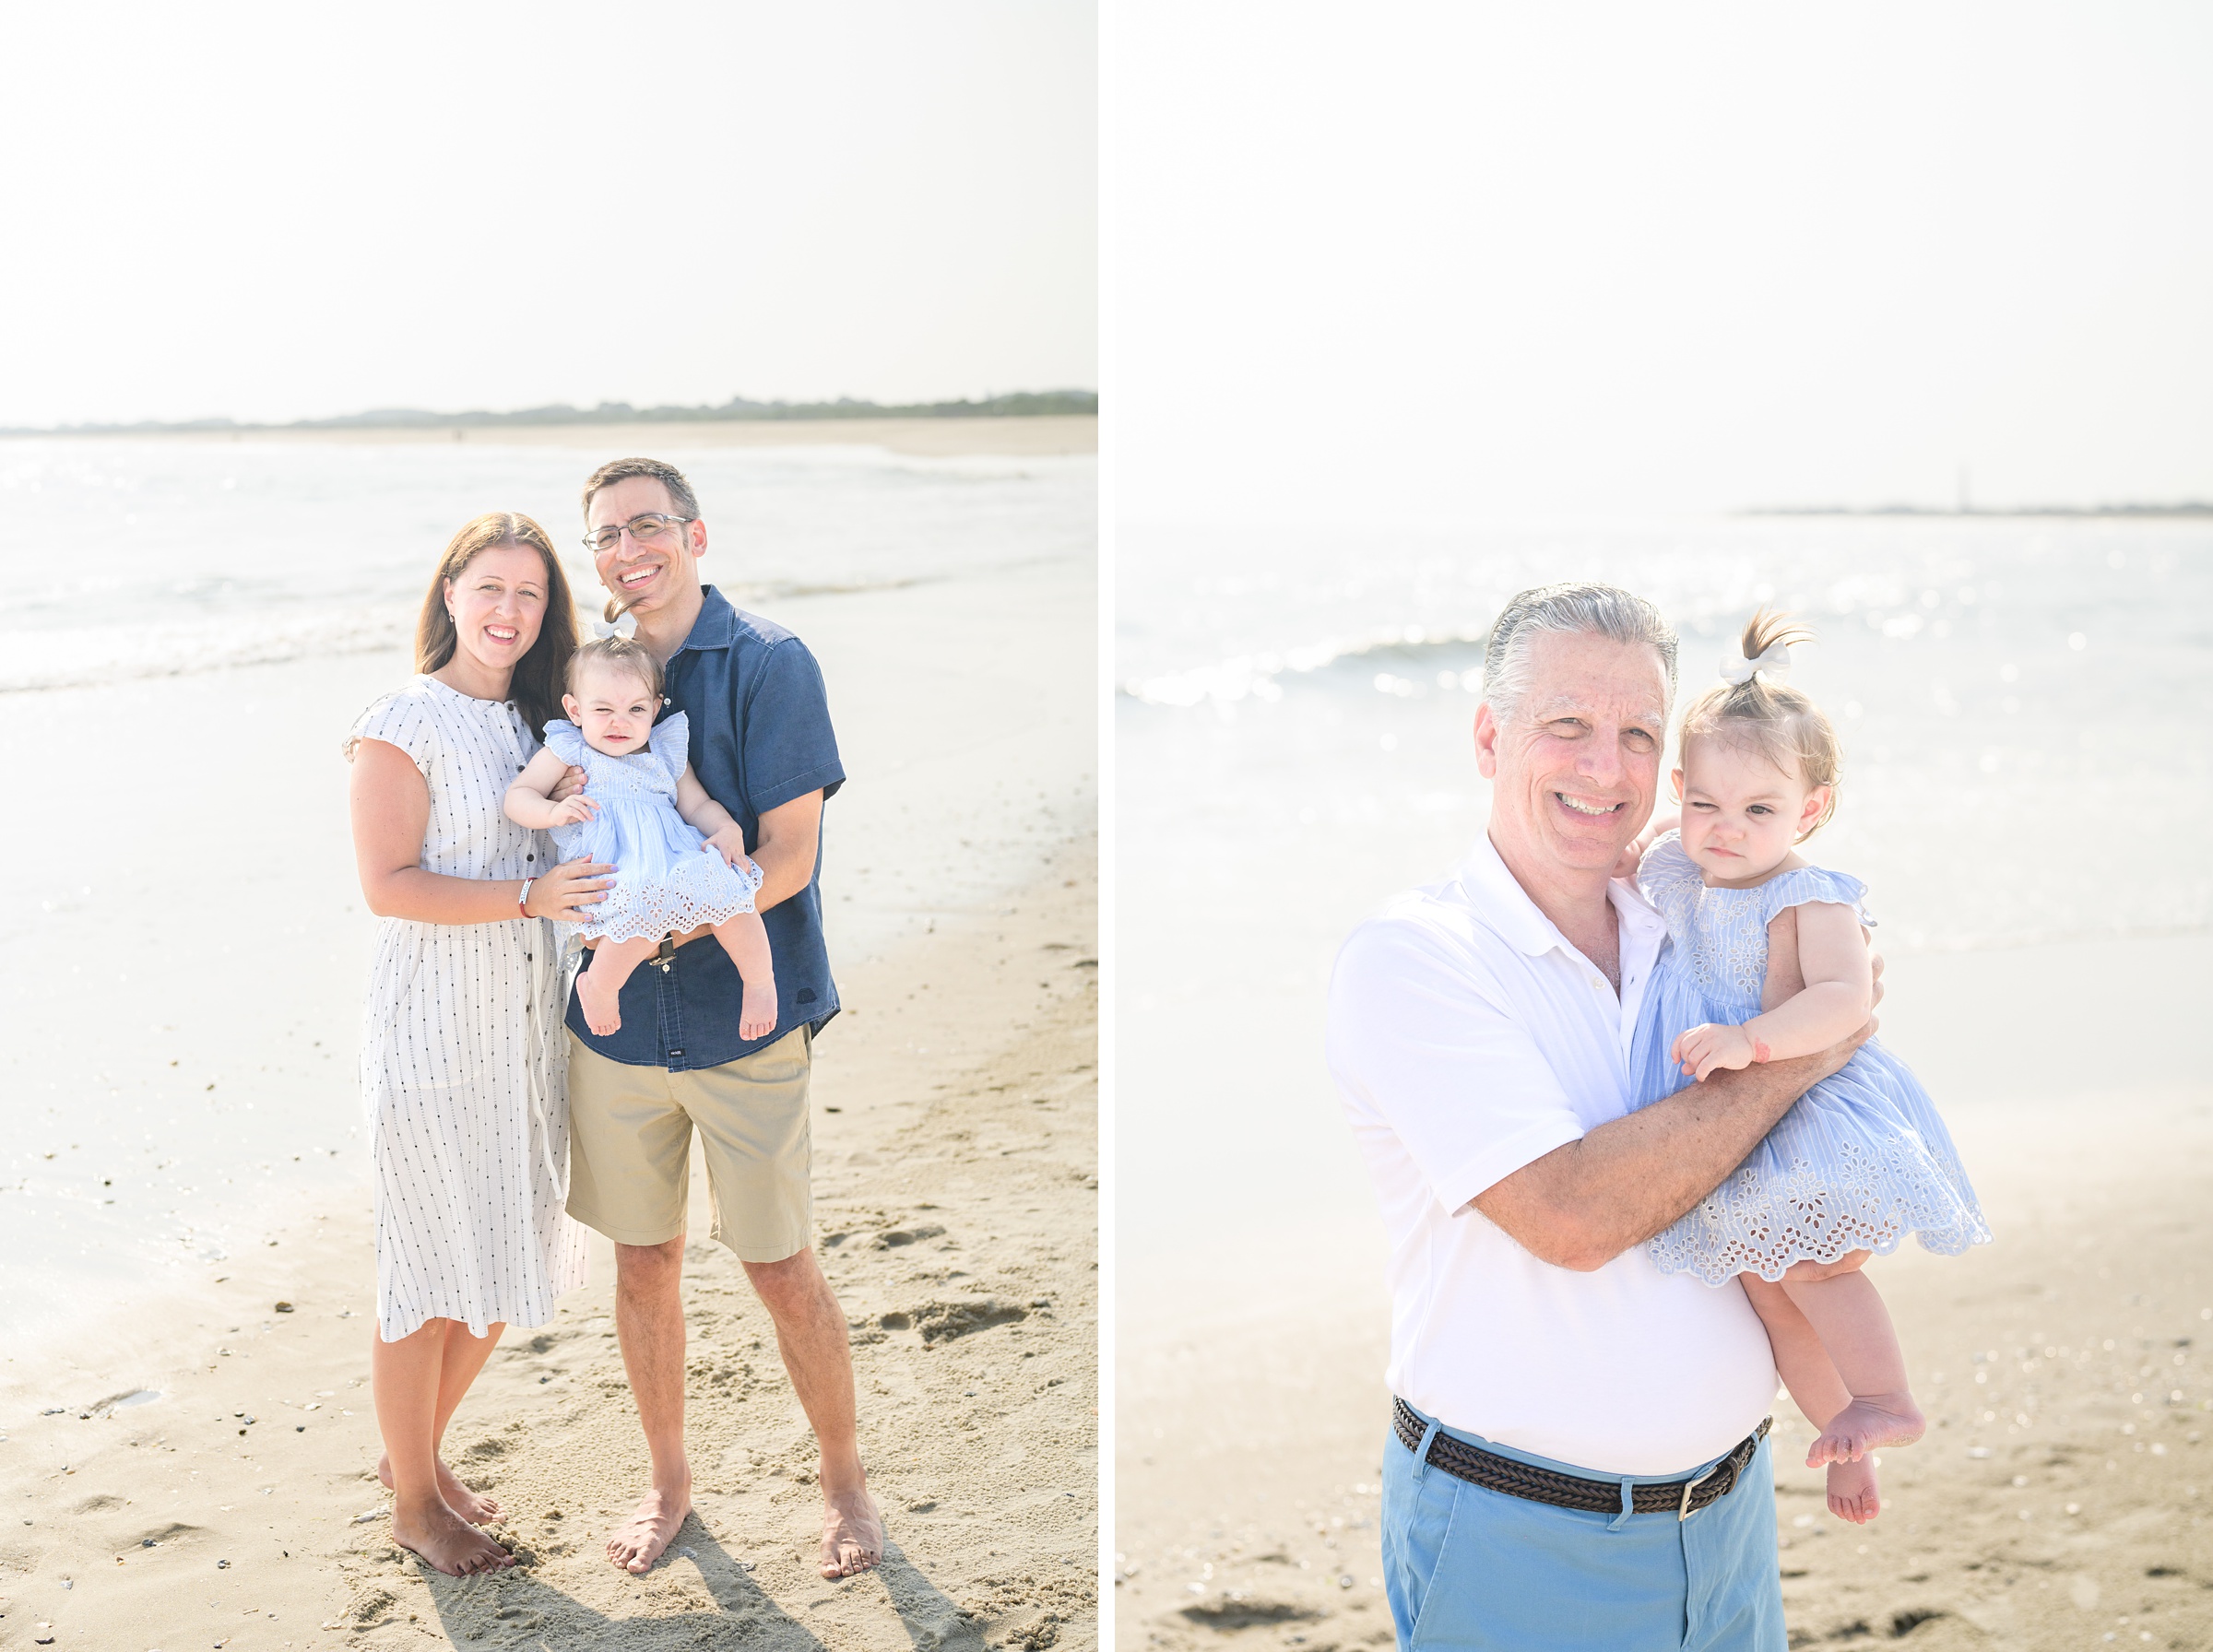 Extended family portraits at Cape May's Cove beach in Maryland, photographed by Cape May Family Photographer Cait Kramer.